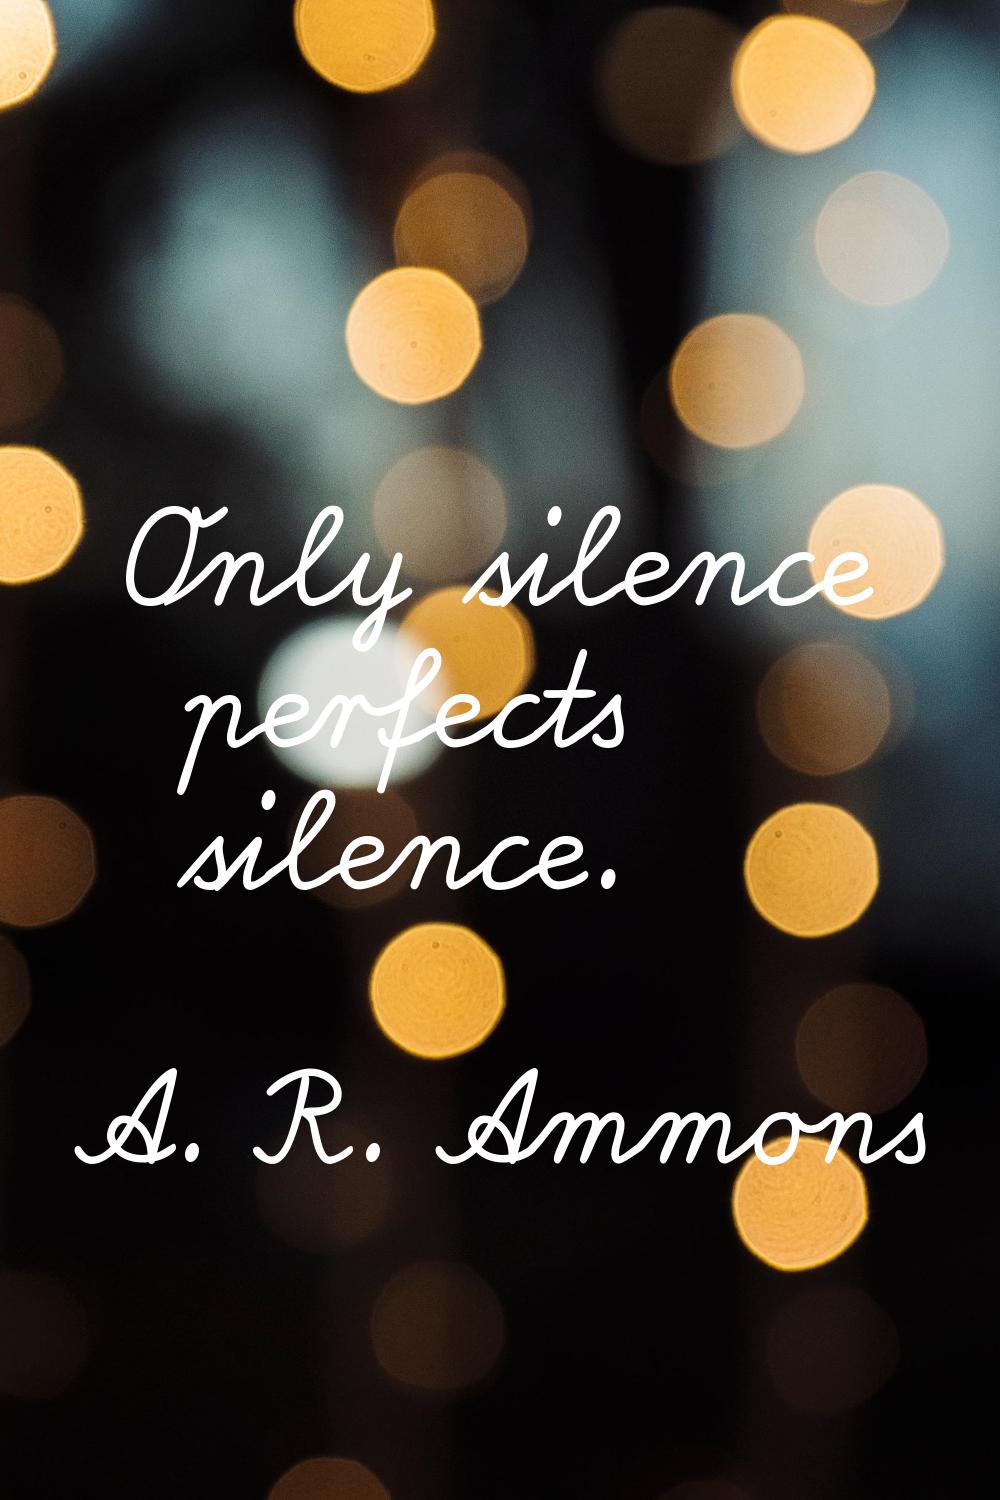 Only silence perfects silence.